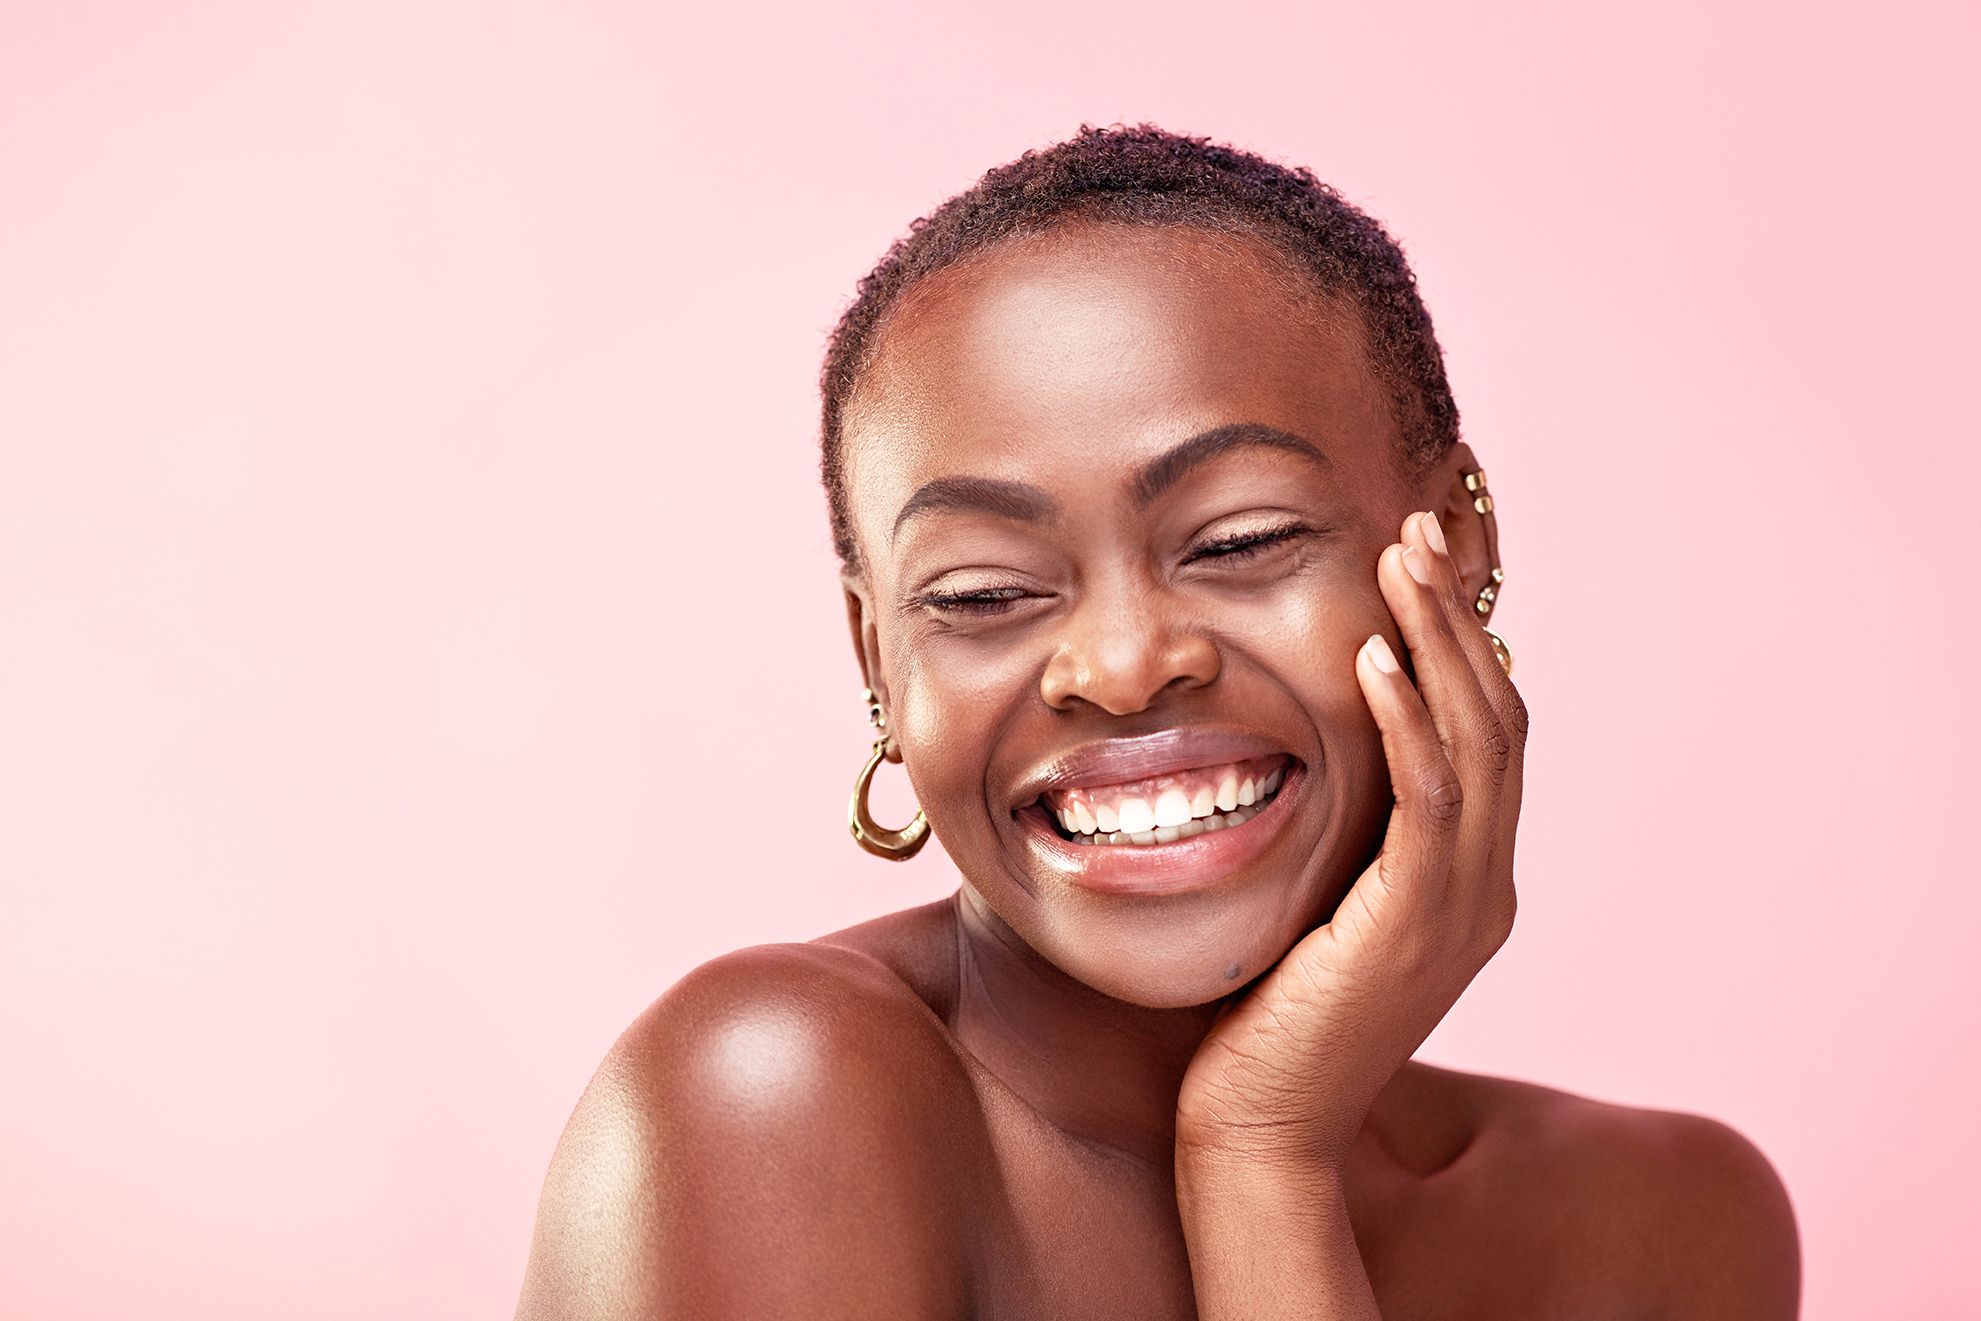 Top 5 Skincare Tips for Healthy and Glowing Skin